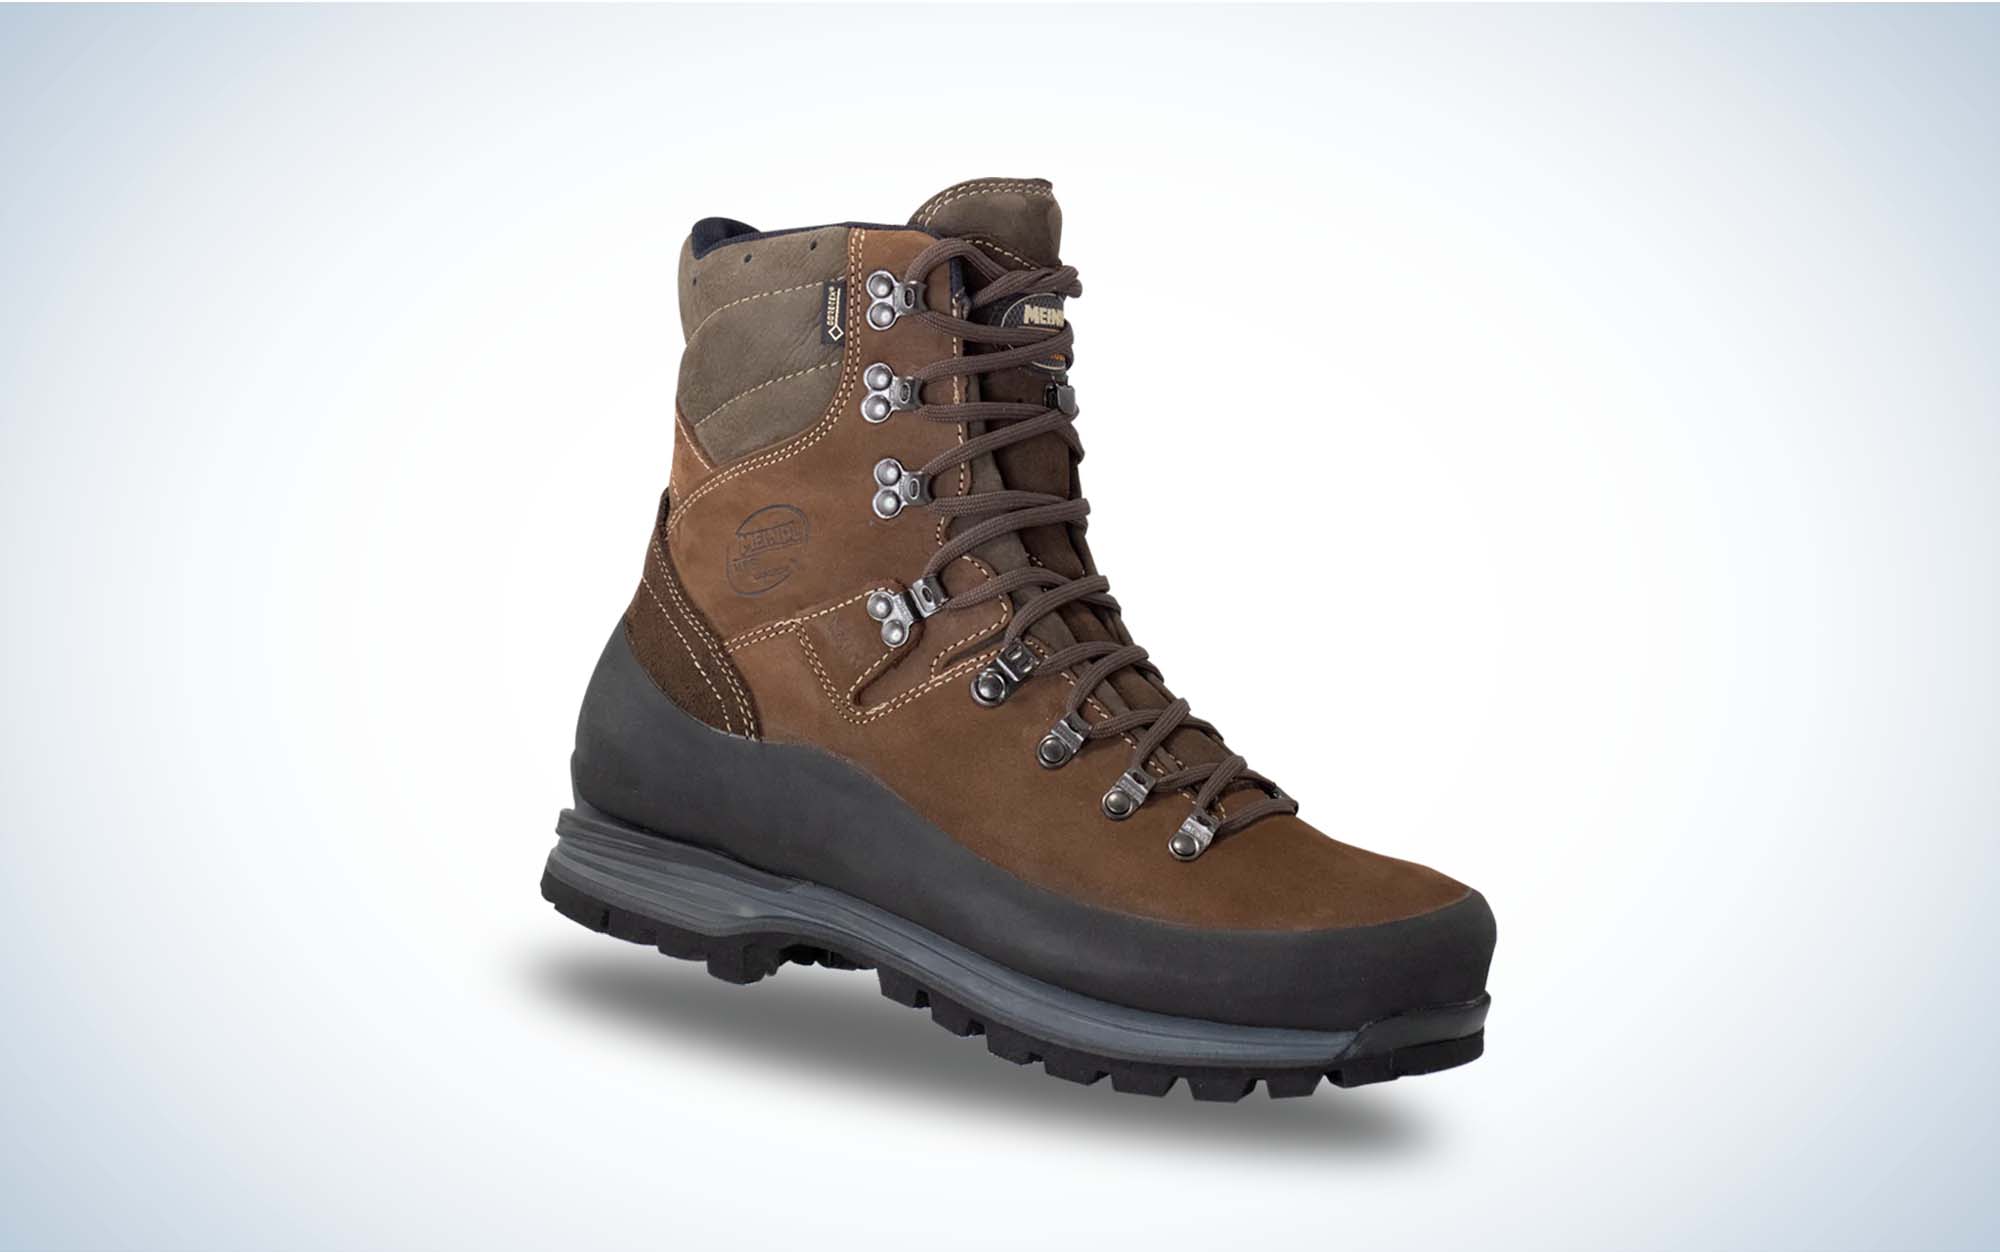 The Meindl Vakuum Hunter are the most comfortable upland hunting boots.